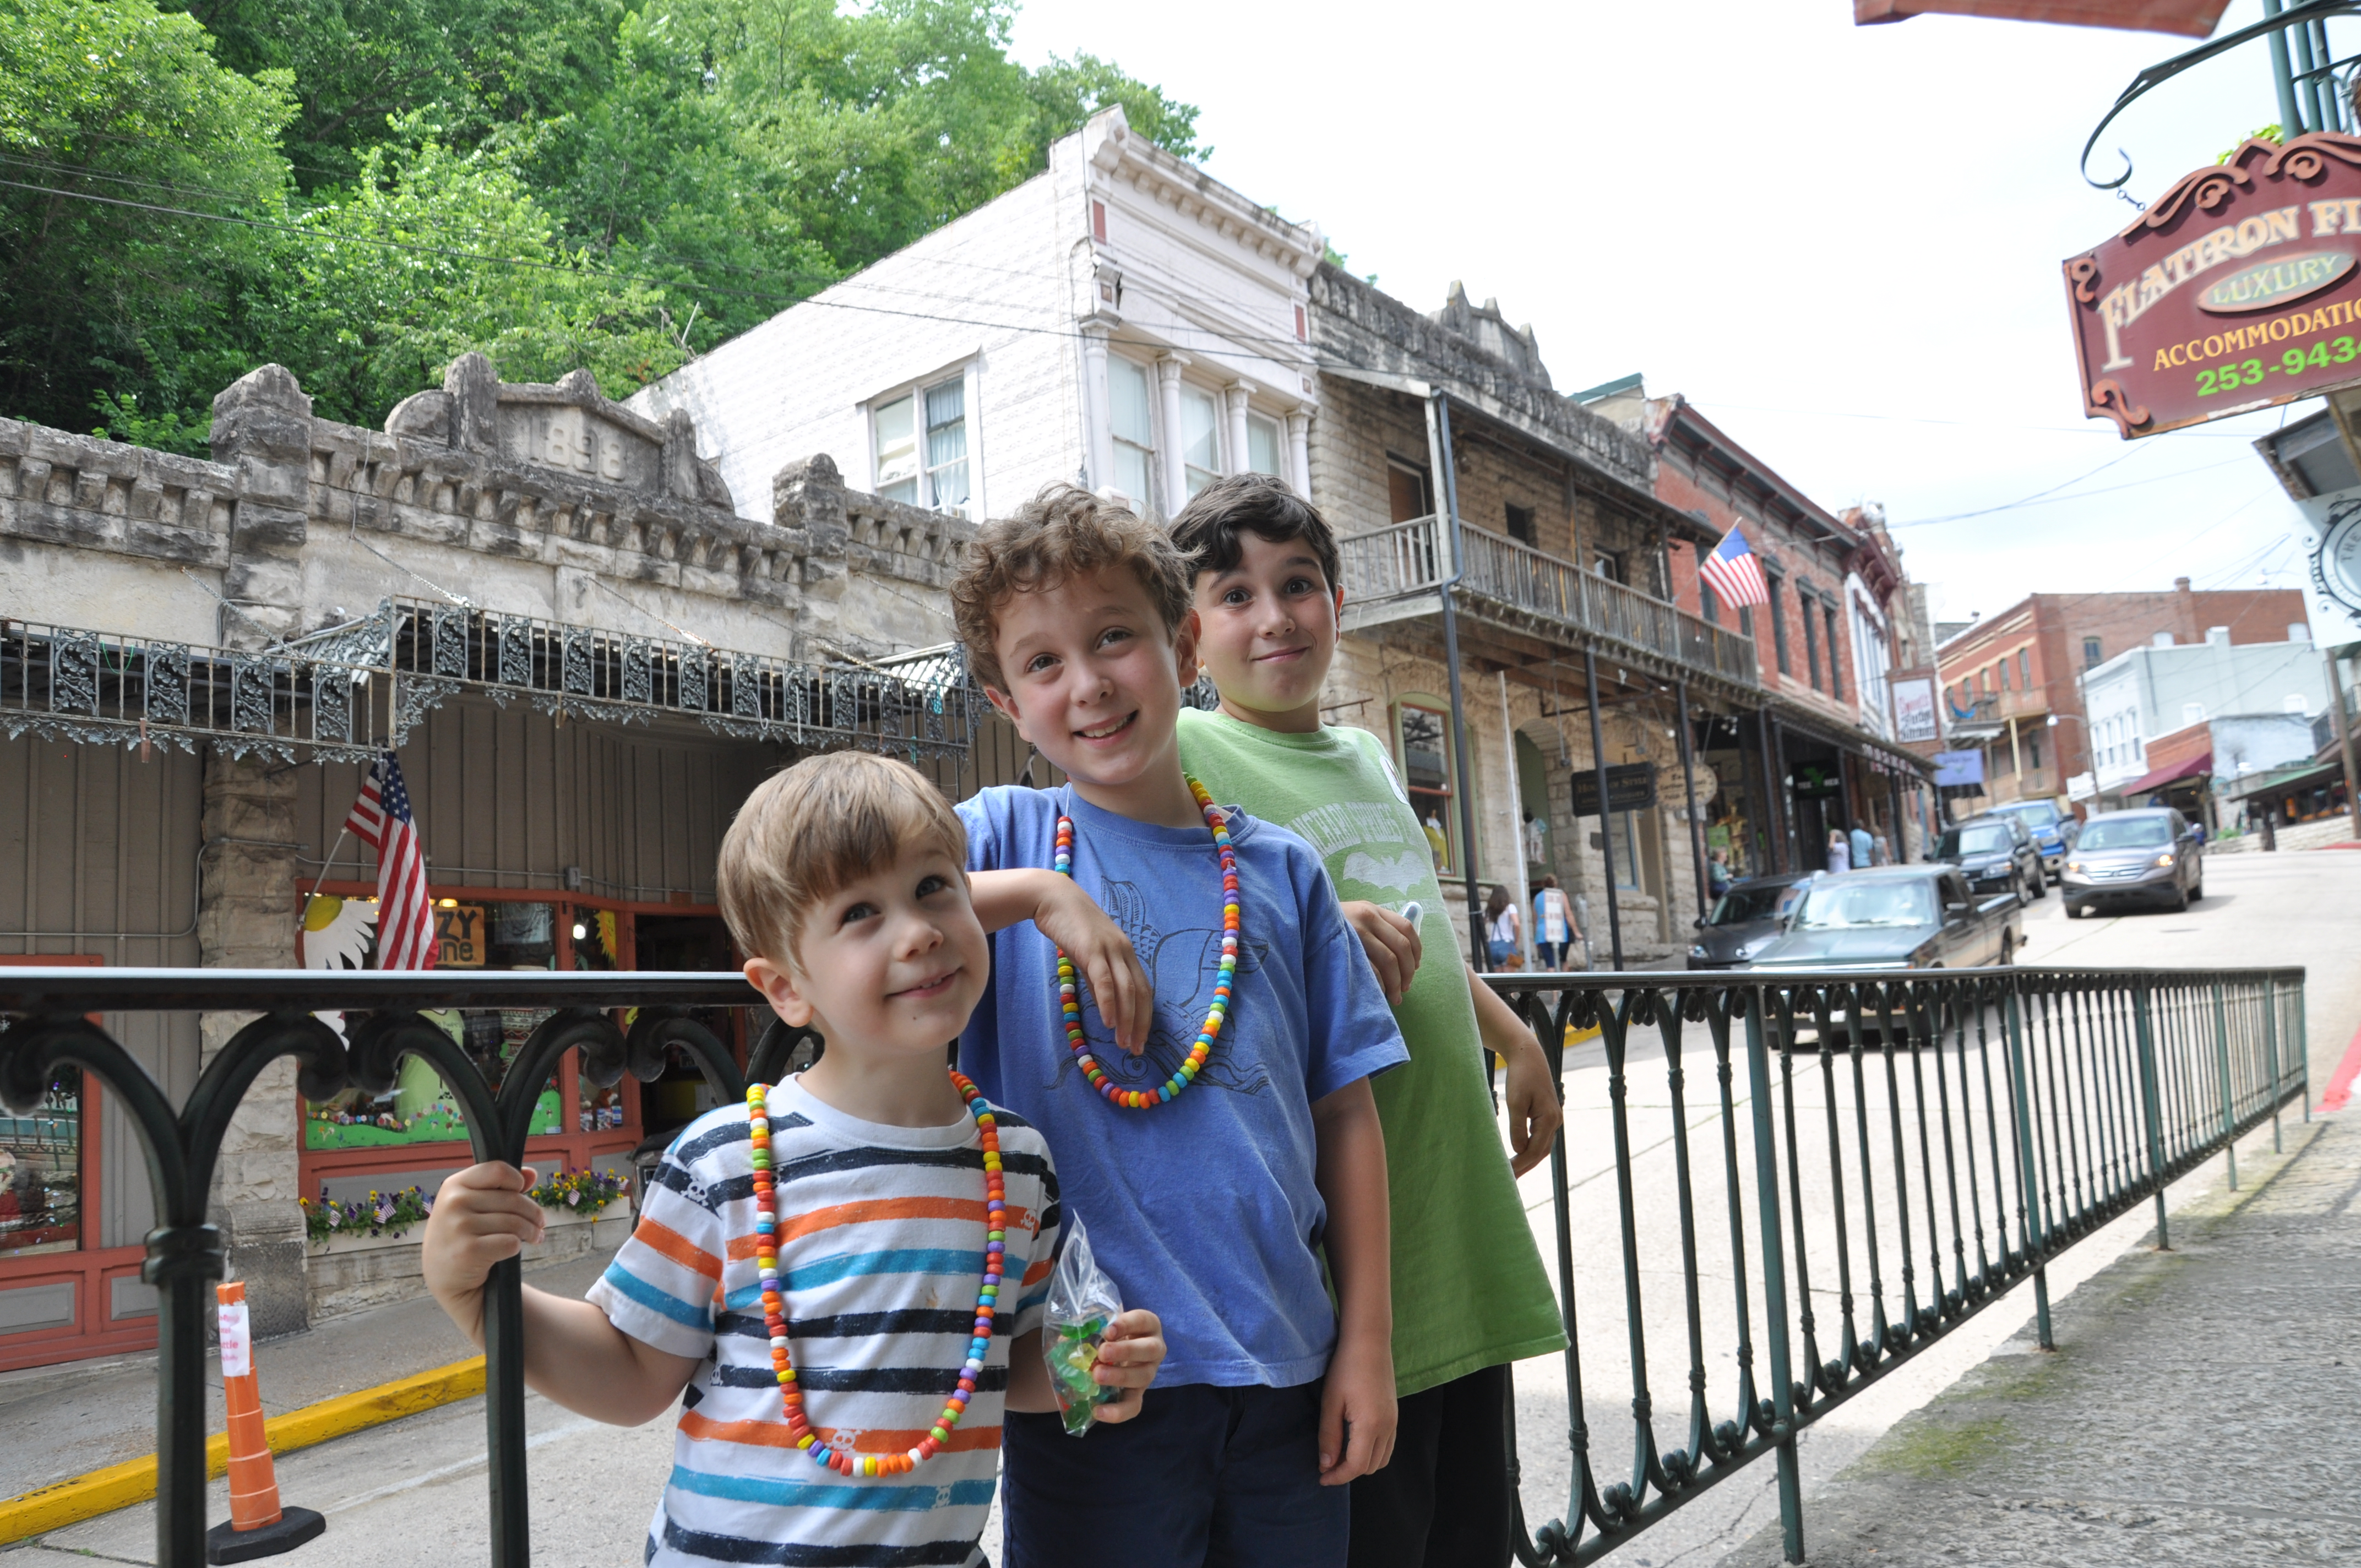 Kids outside candy store in Eureka Springs